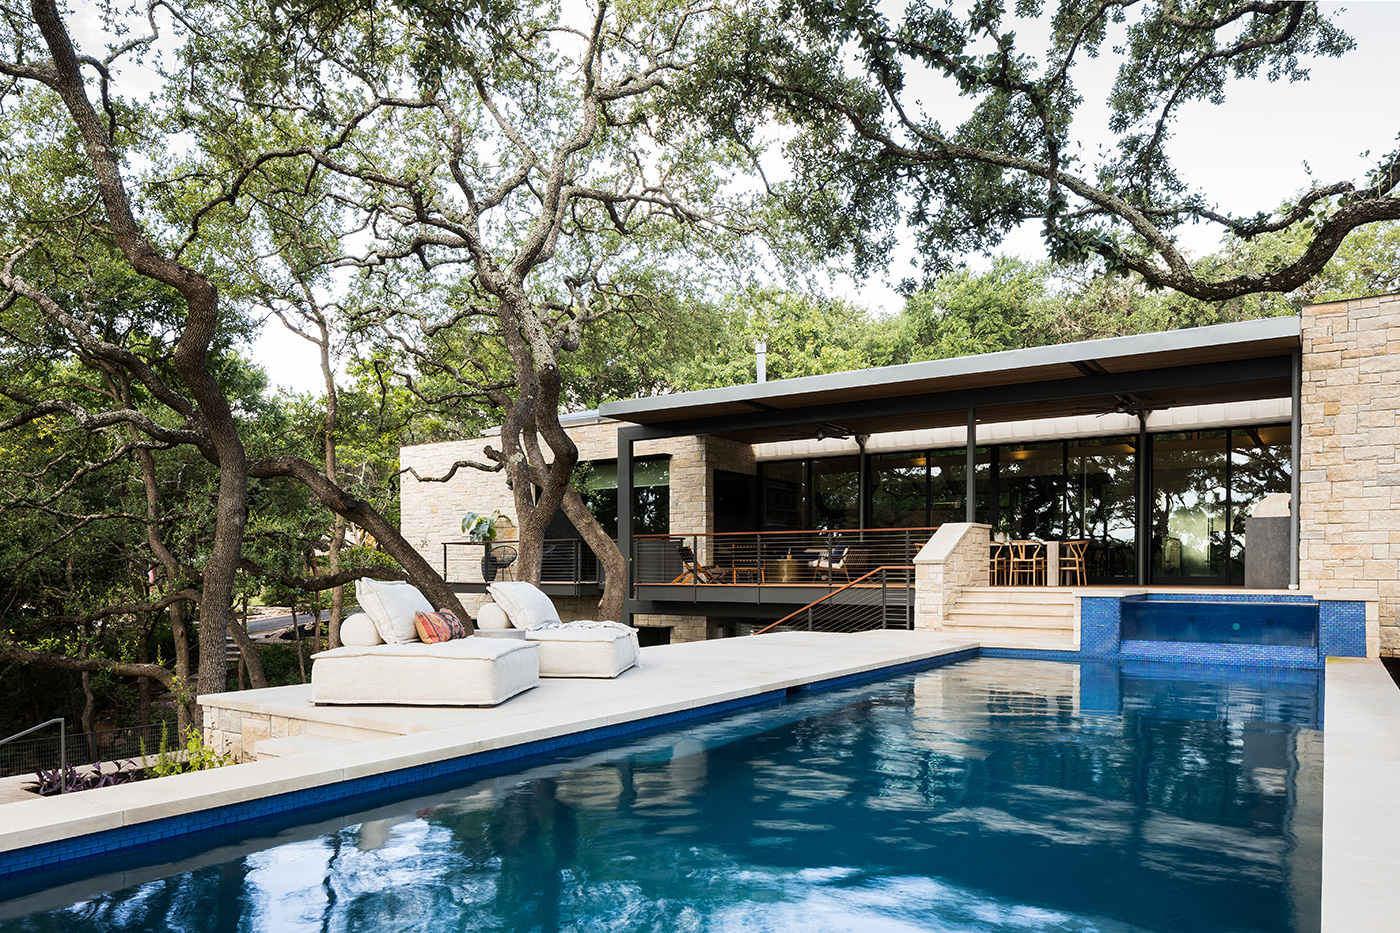 The tree covered pool and back patio of a house.